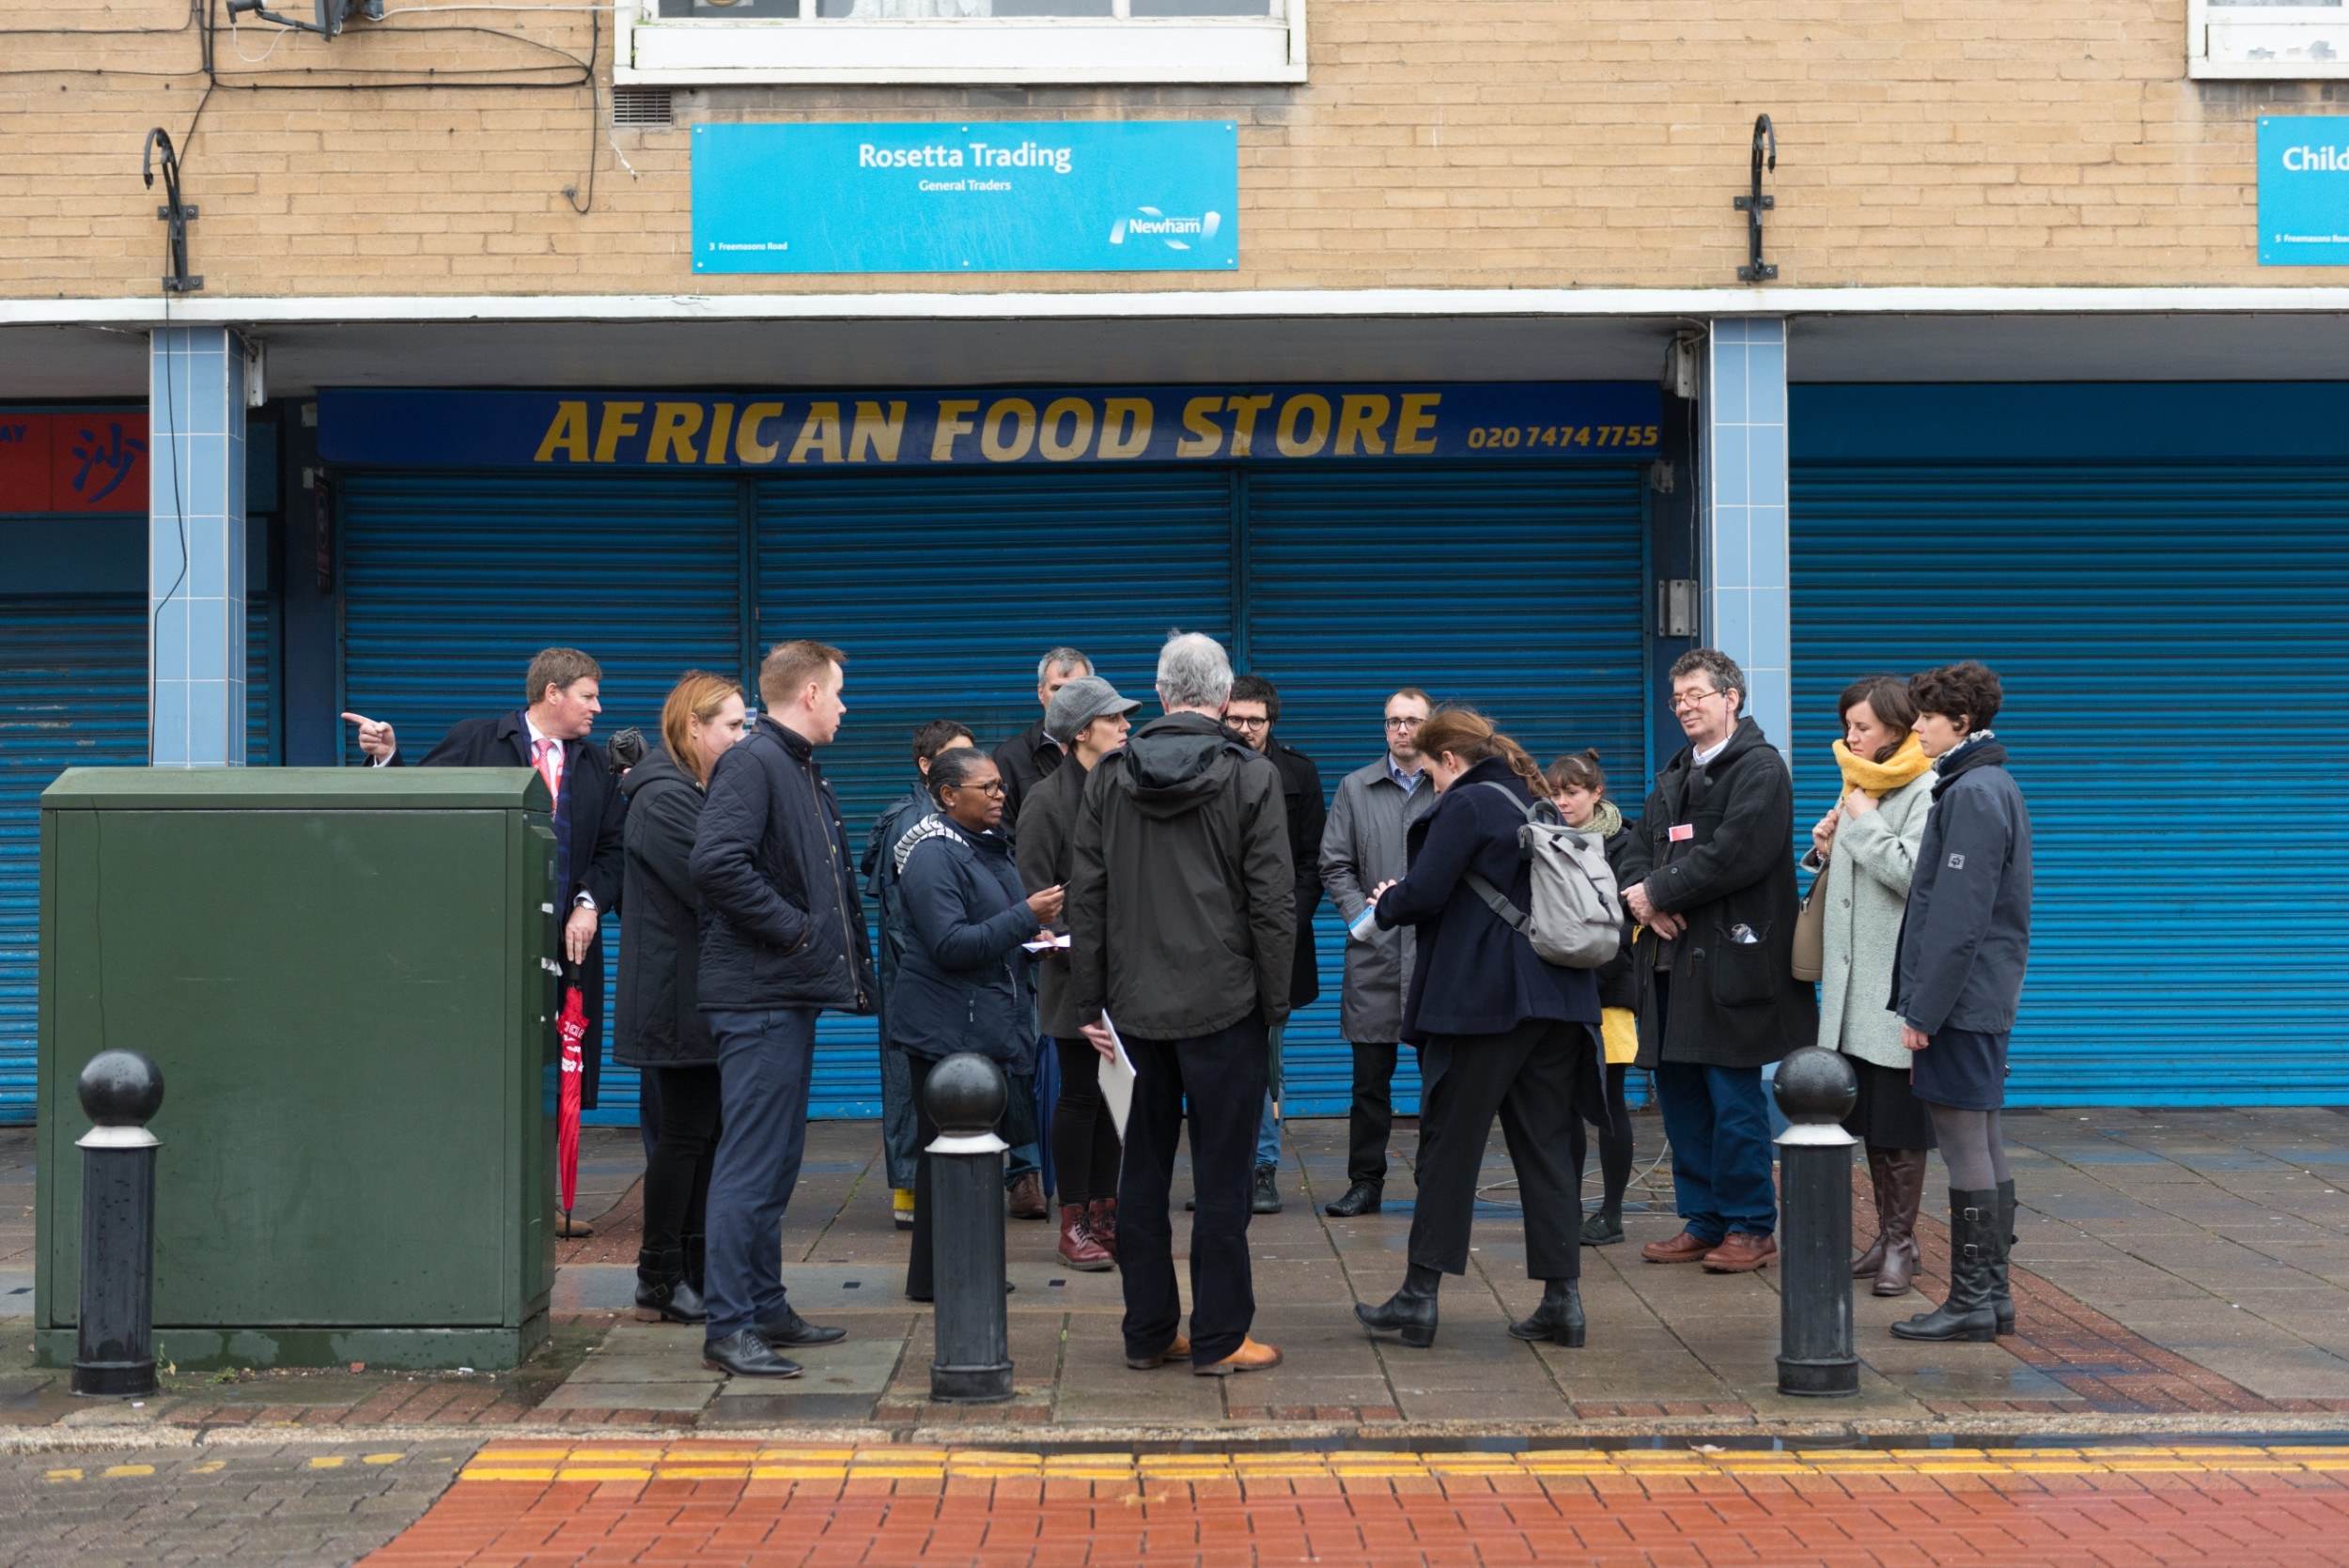 Group of people standing outside a shuttered shopfront